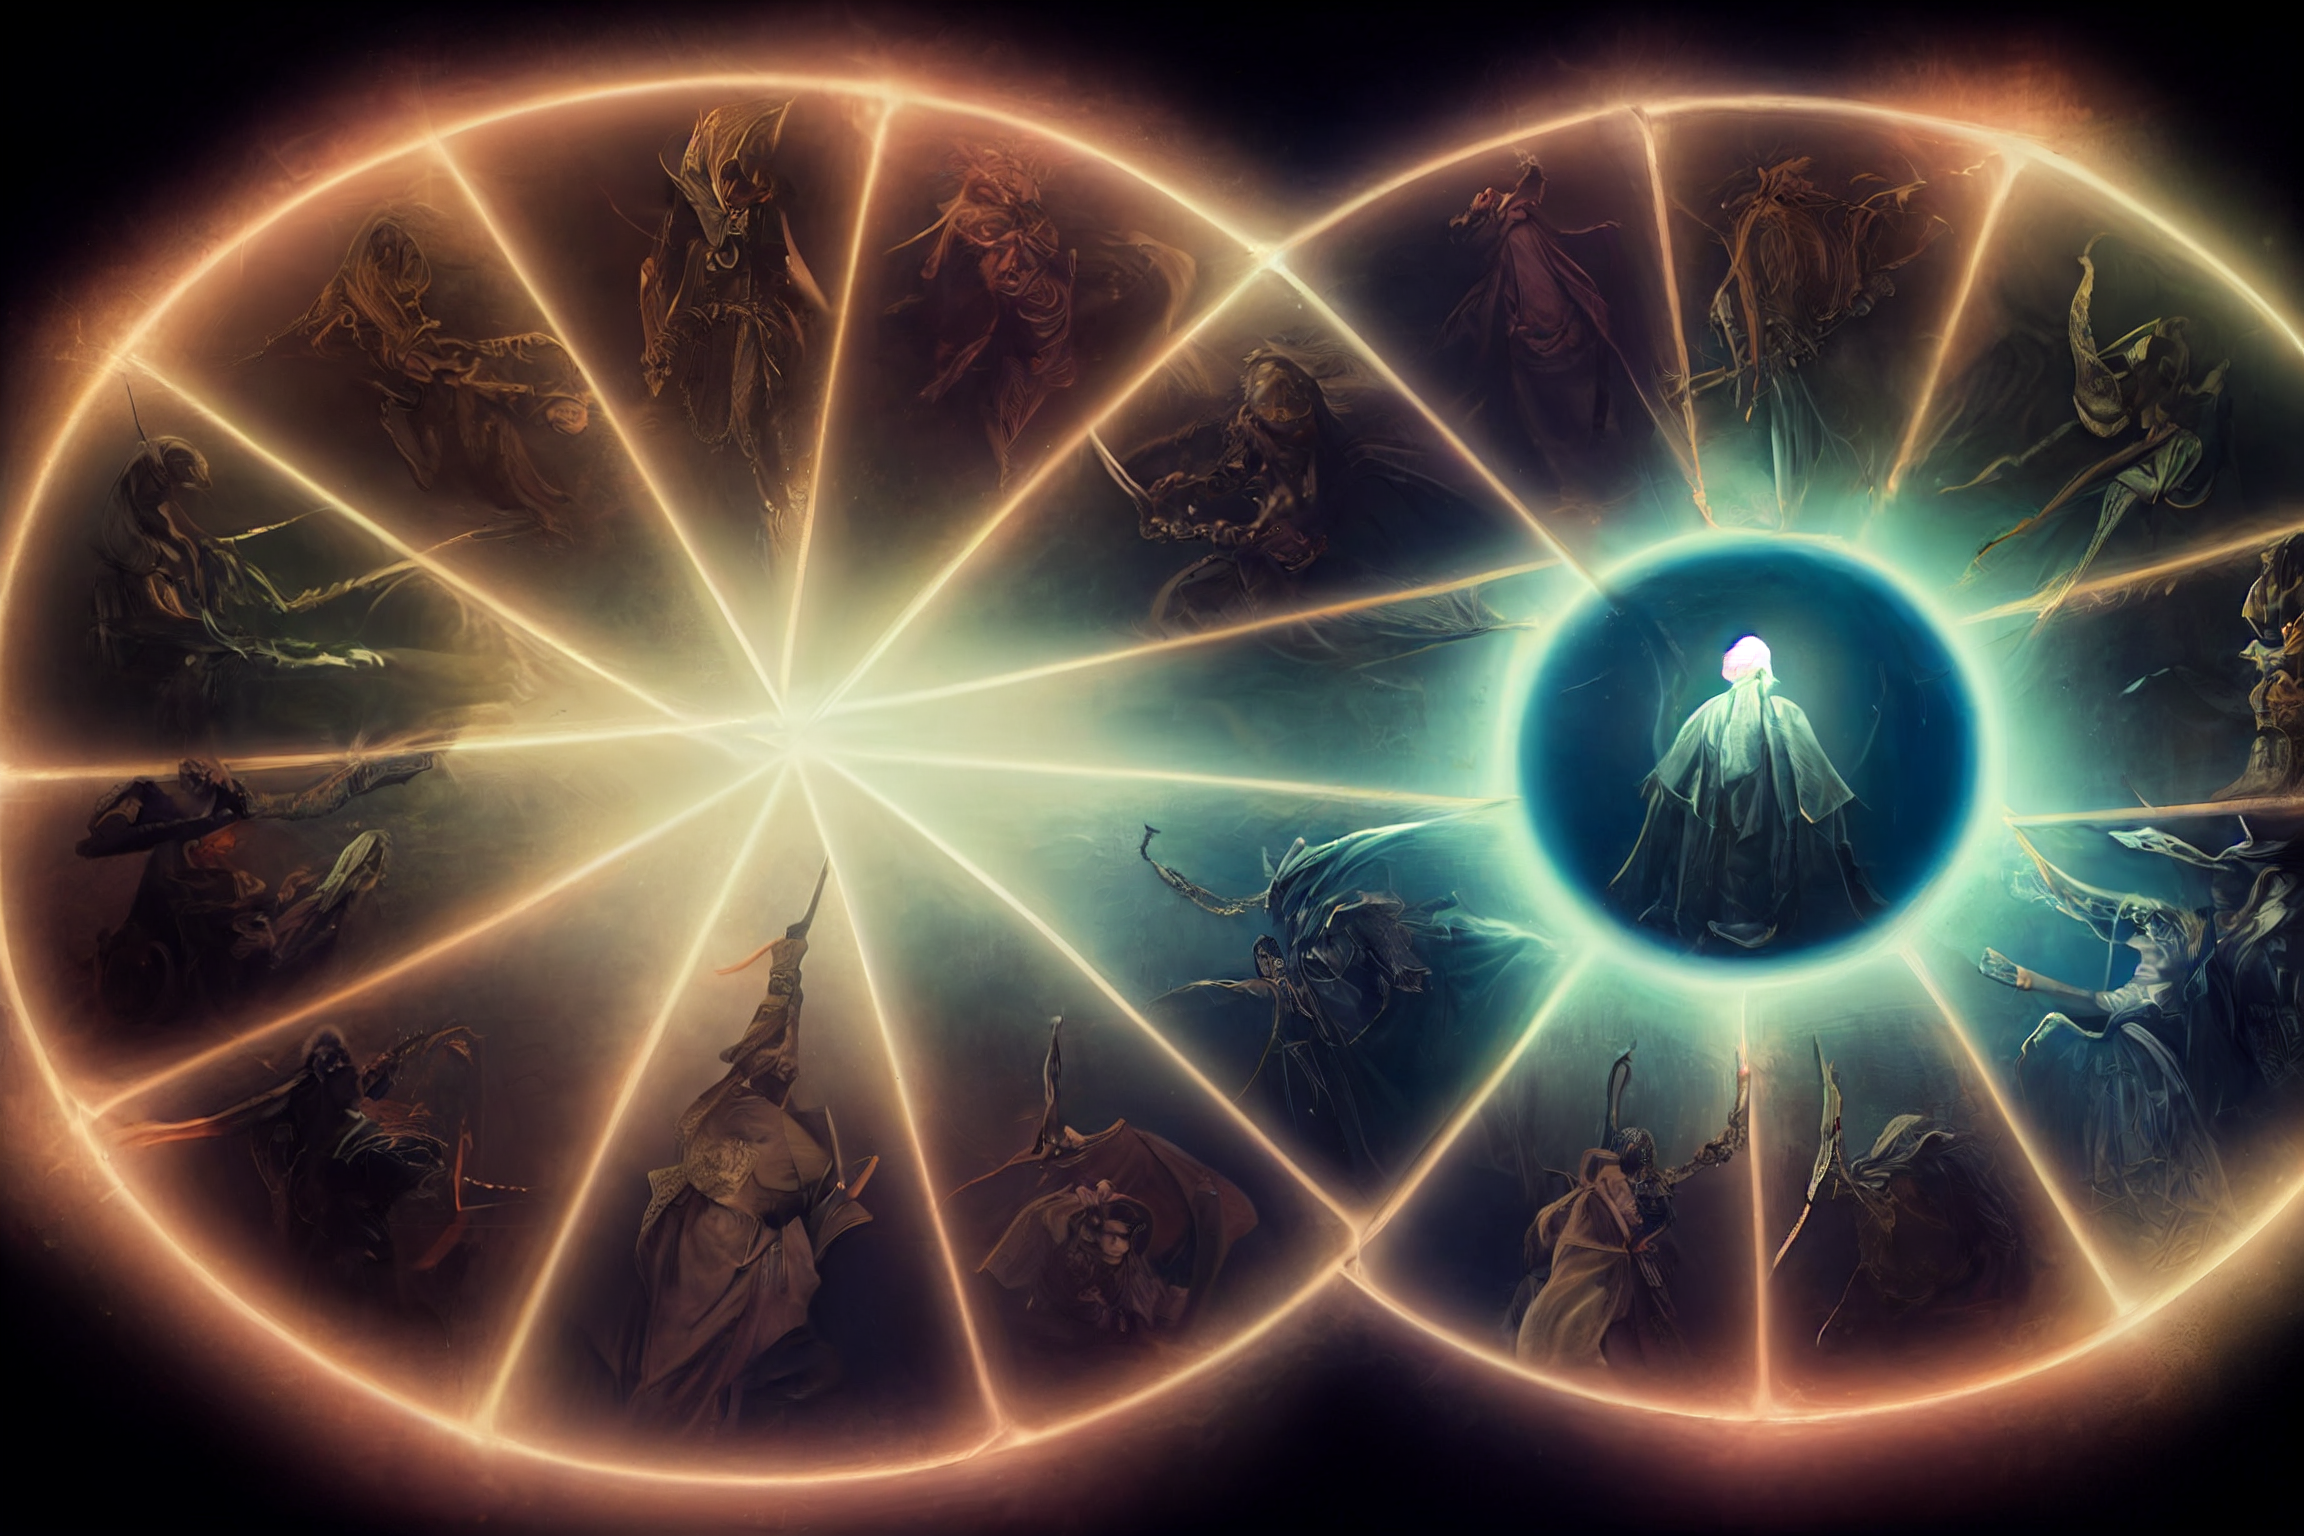 A group of fantasy characters in two overlapping circles divided into even partitioned slices all reaching towards the center with a glowing figure in the center of the right circle